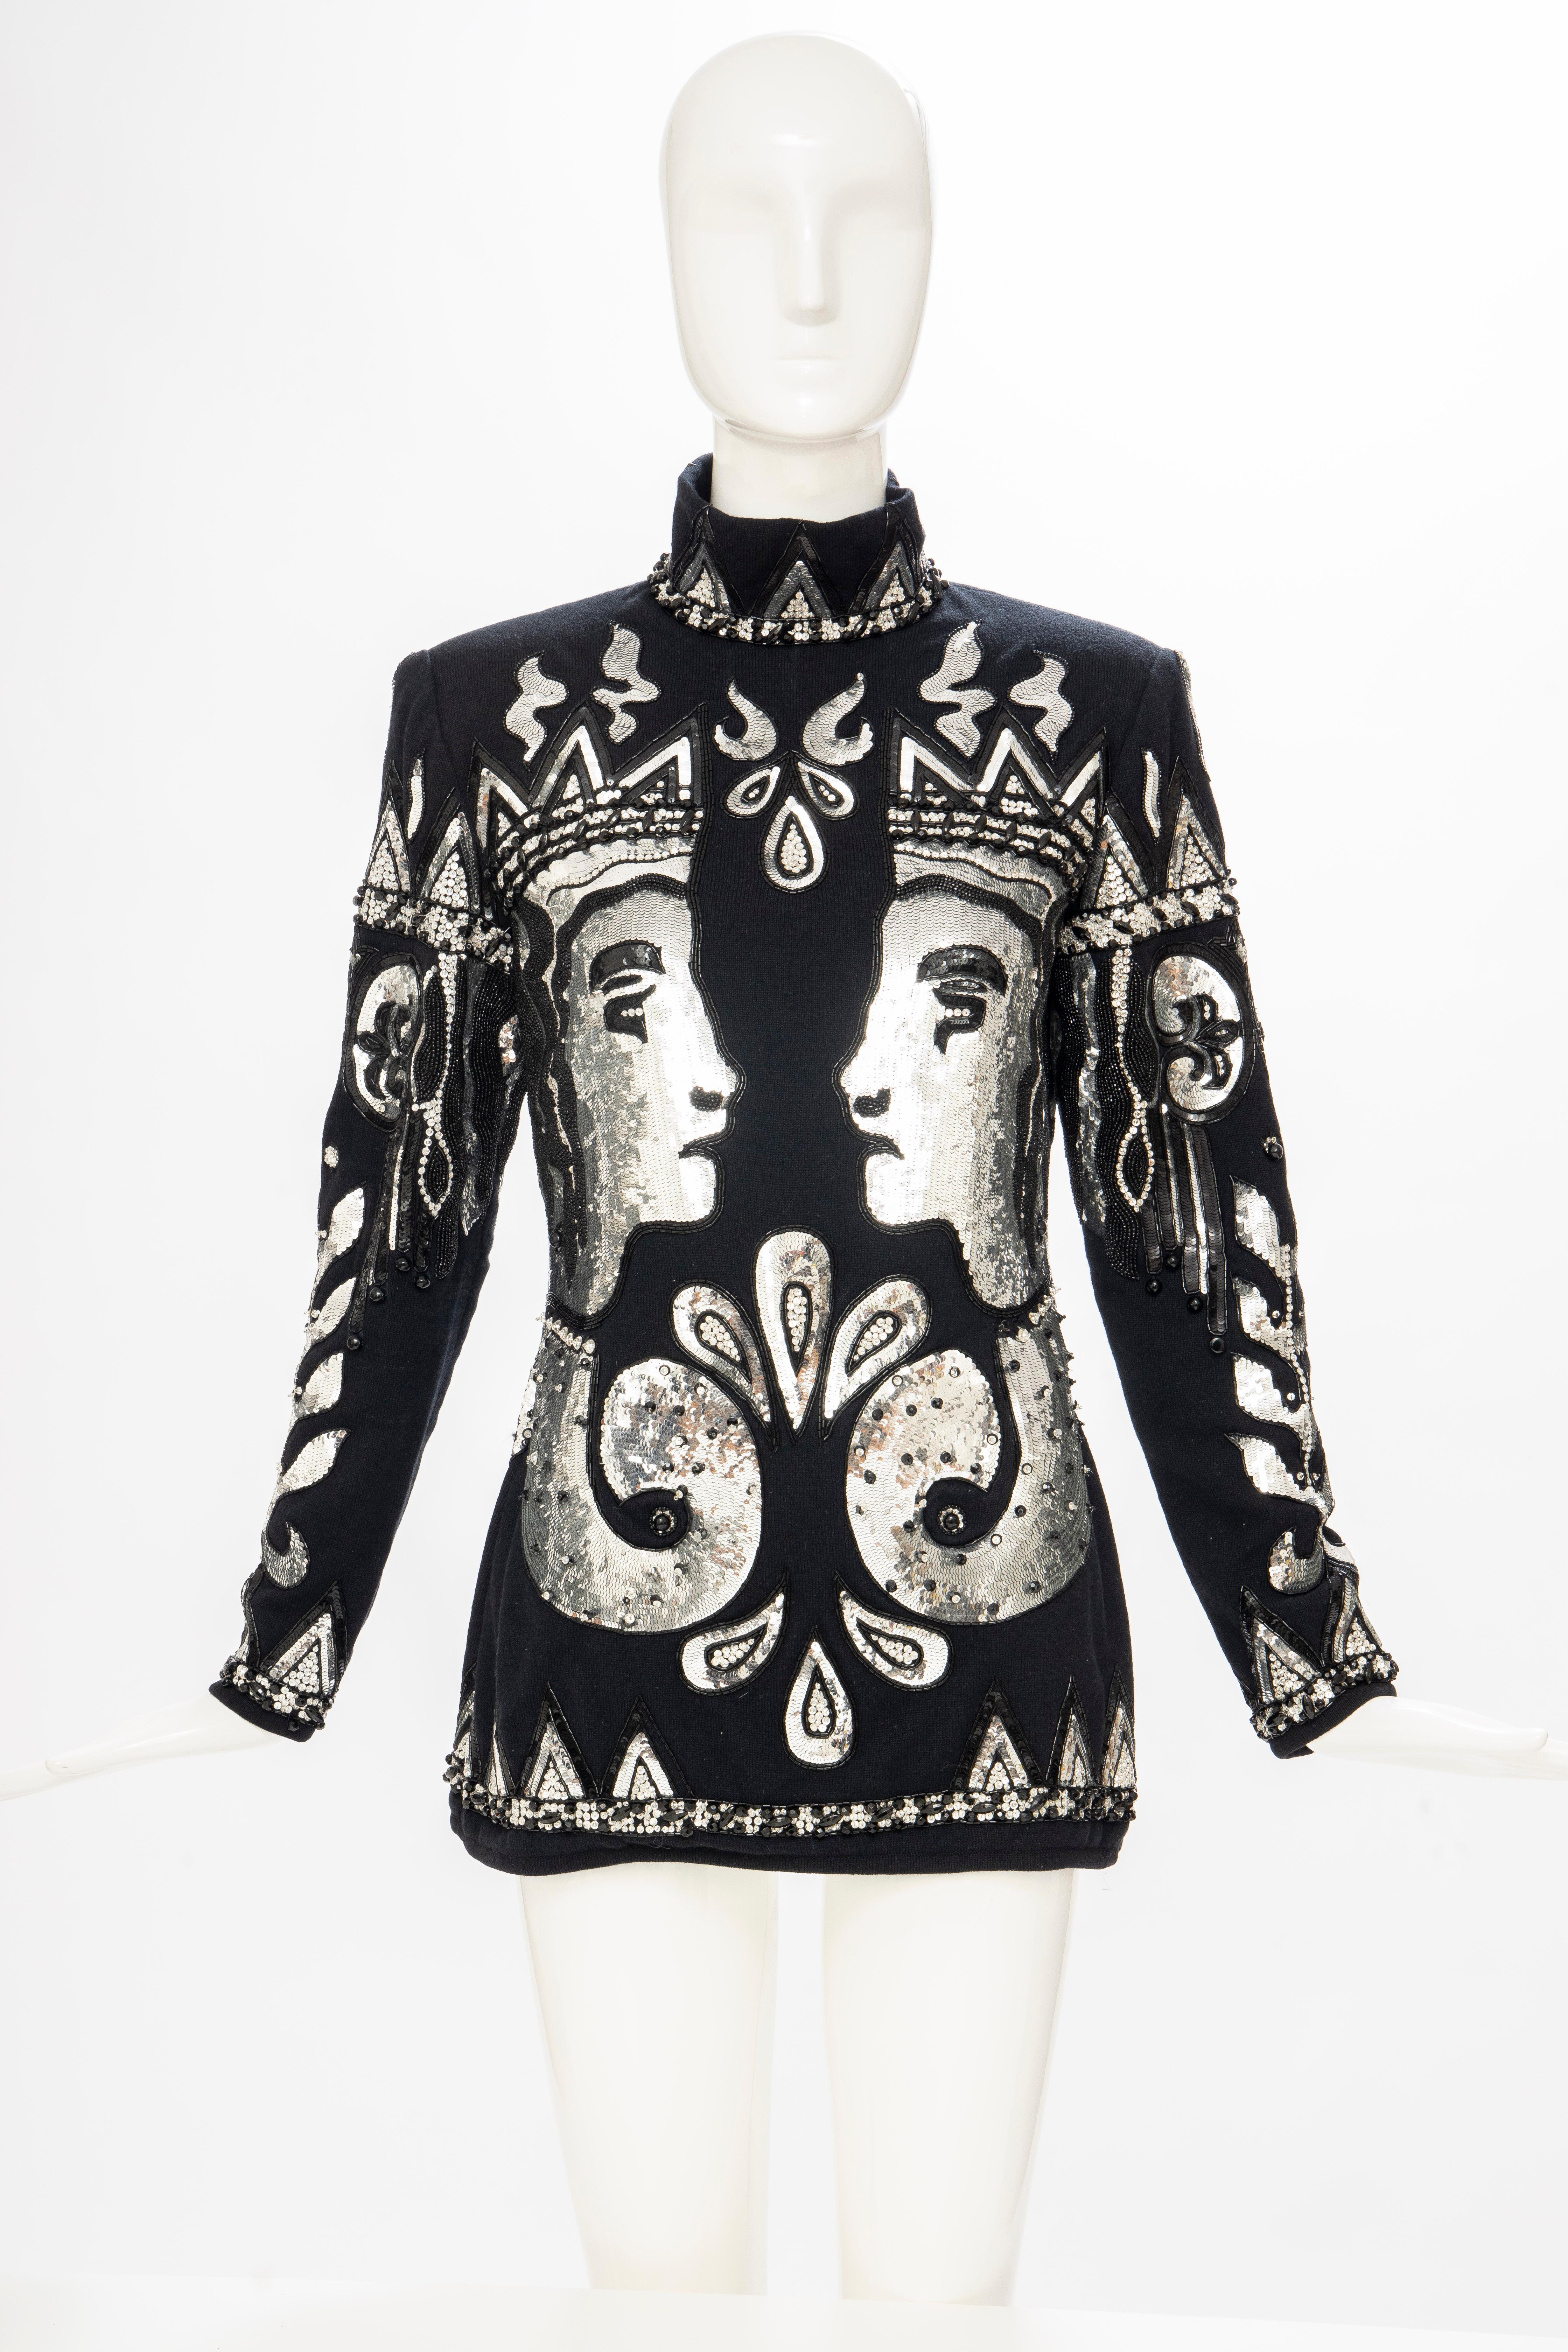 Valentino Boutique, Fall-Winter 1989-90, black wool trurtleneck sweater embroidered with silver & black sequins with black beadwork, back zip and fully lined in silk chiffon. 

The sweater was inspired by Etruscan Pottery and is part of the